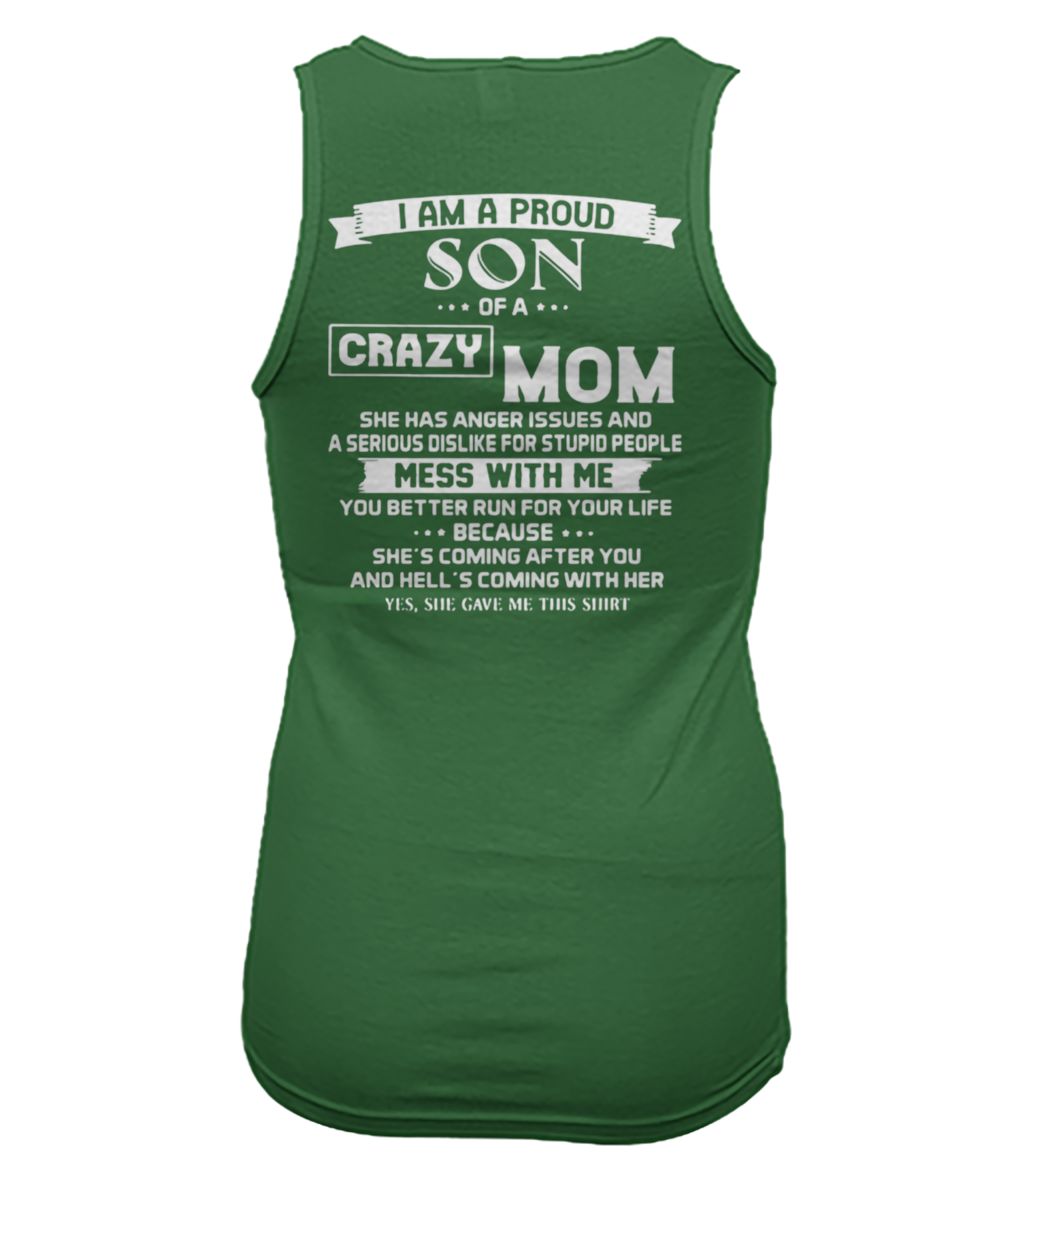 I am a proud son of a crazy mom mess with me you better run for your life women's tank top